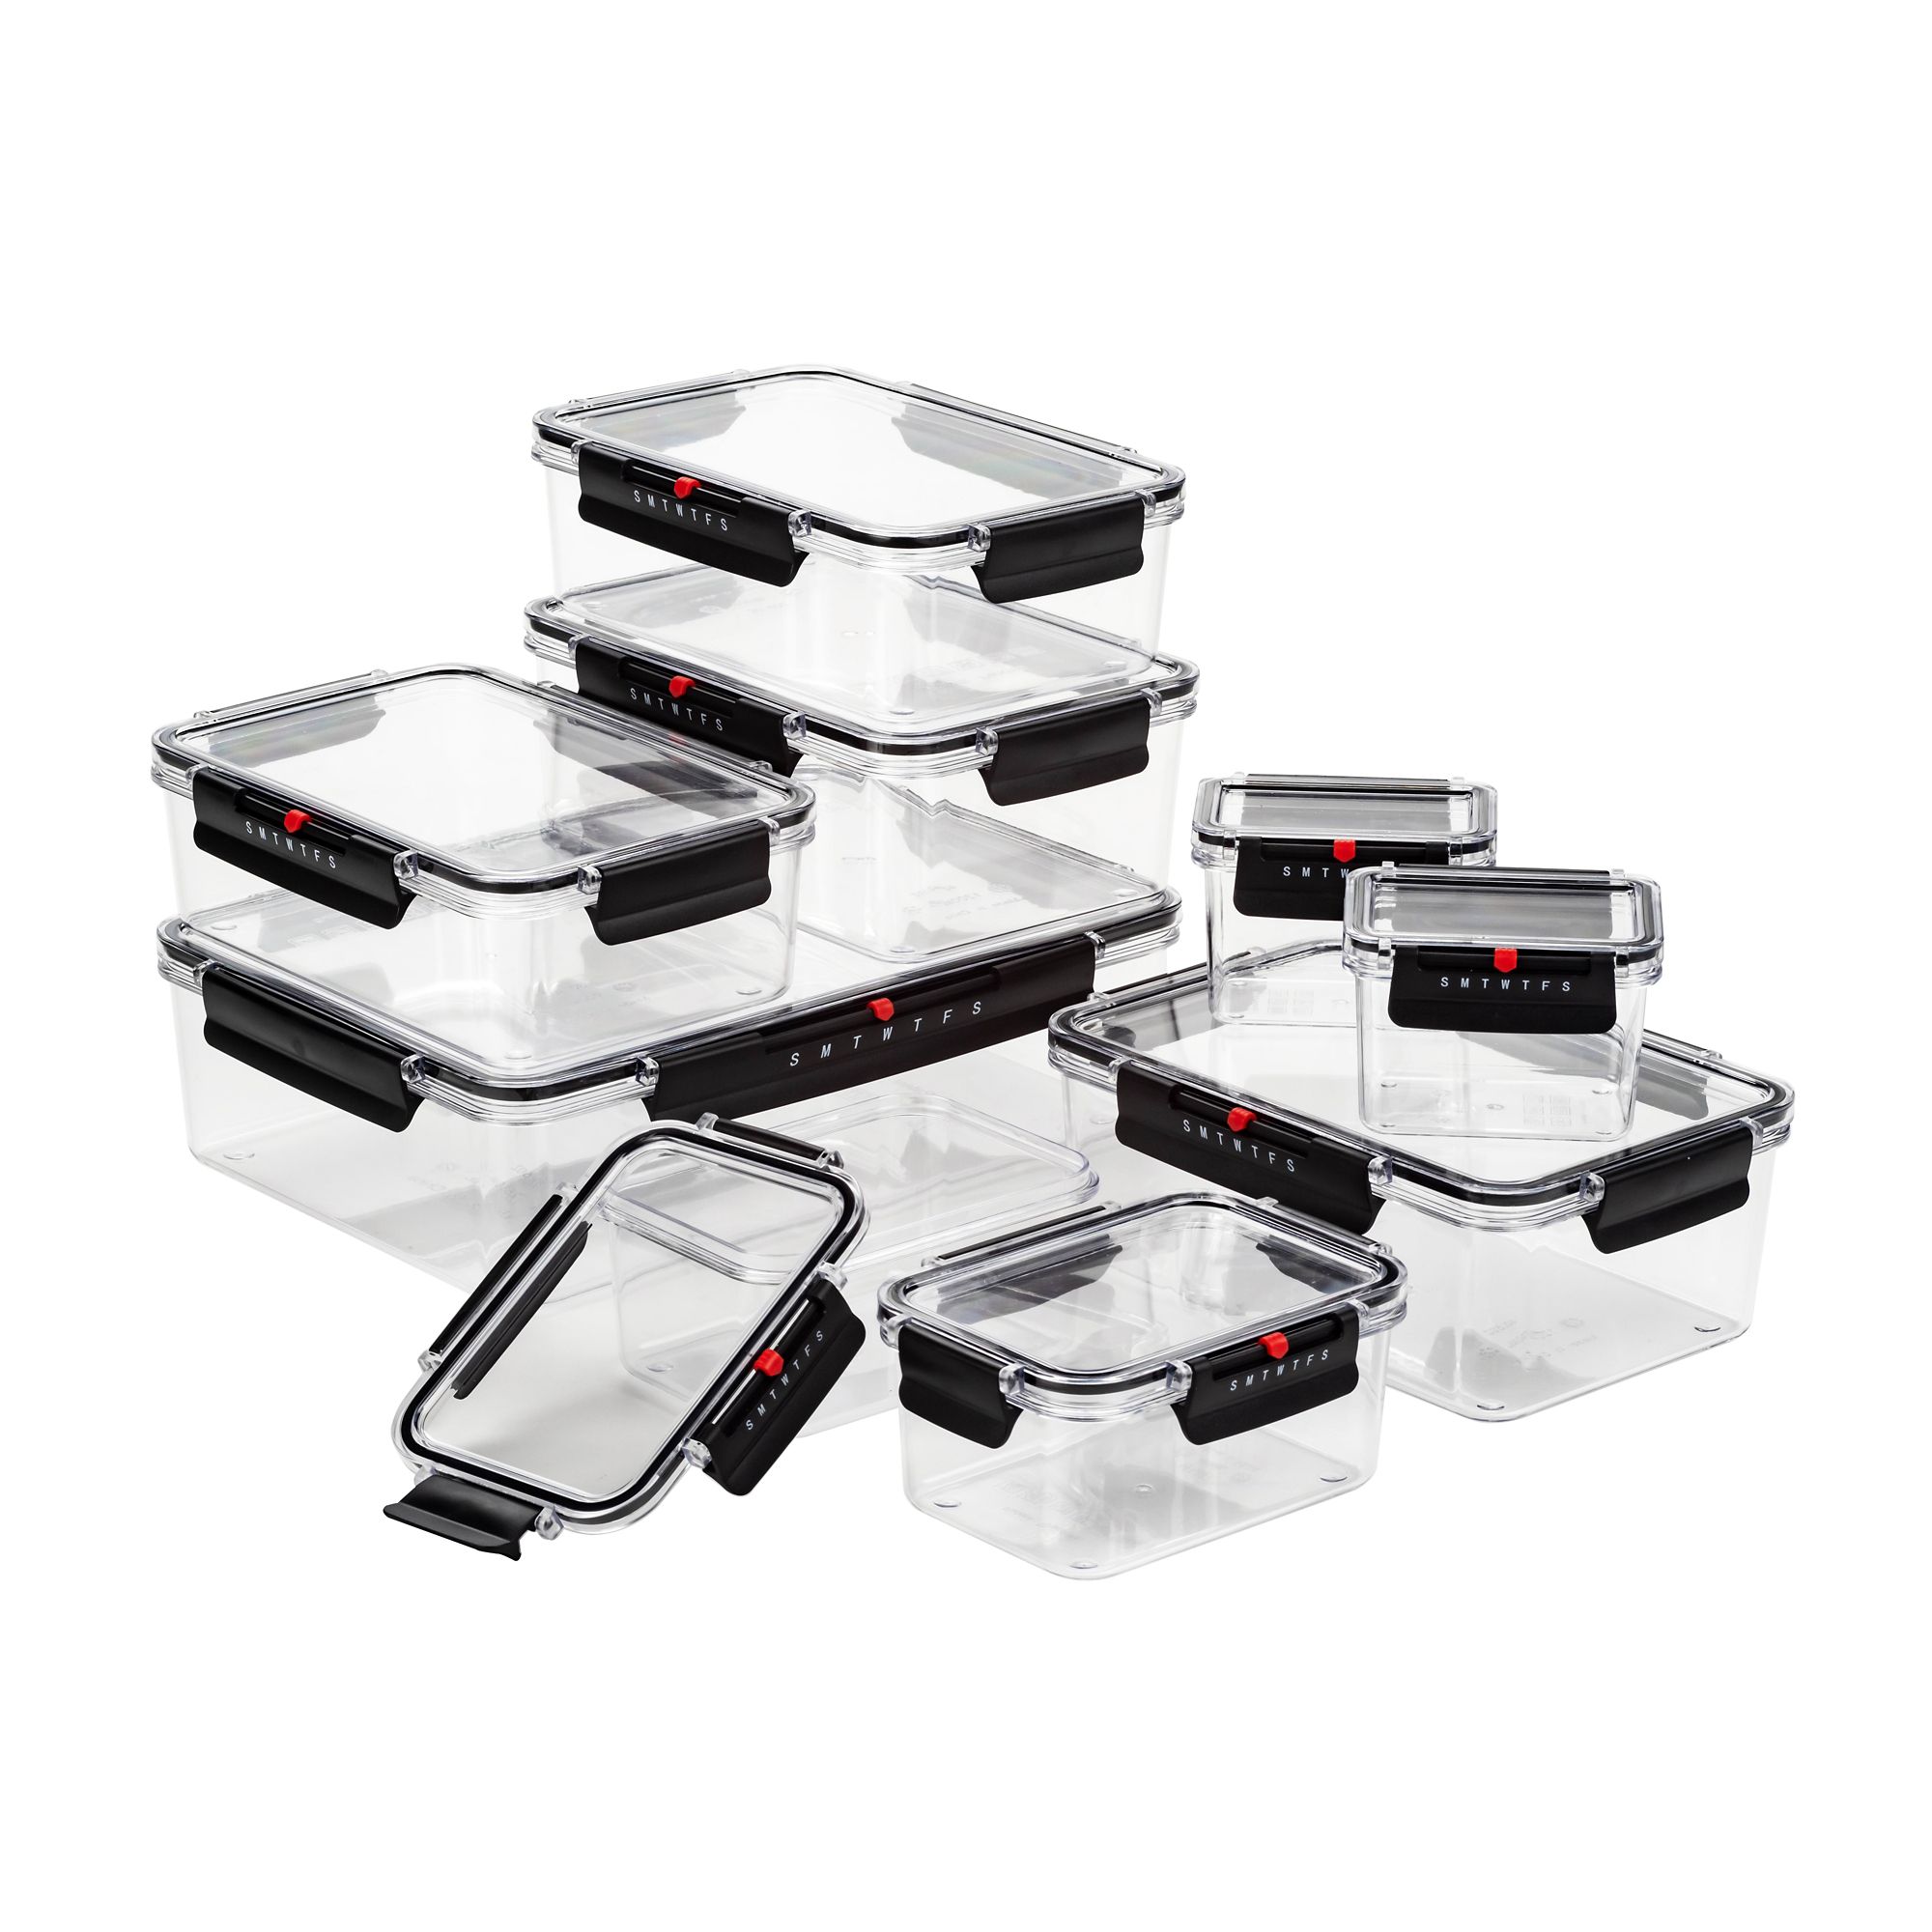 Rubbermaid Brilliance Microwavable Food Storage Container Set, 18